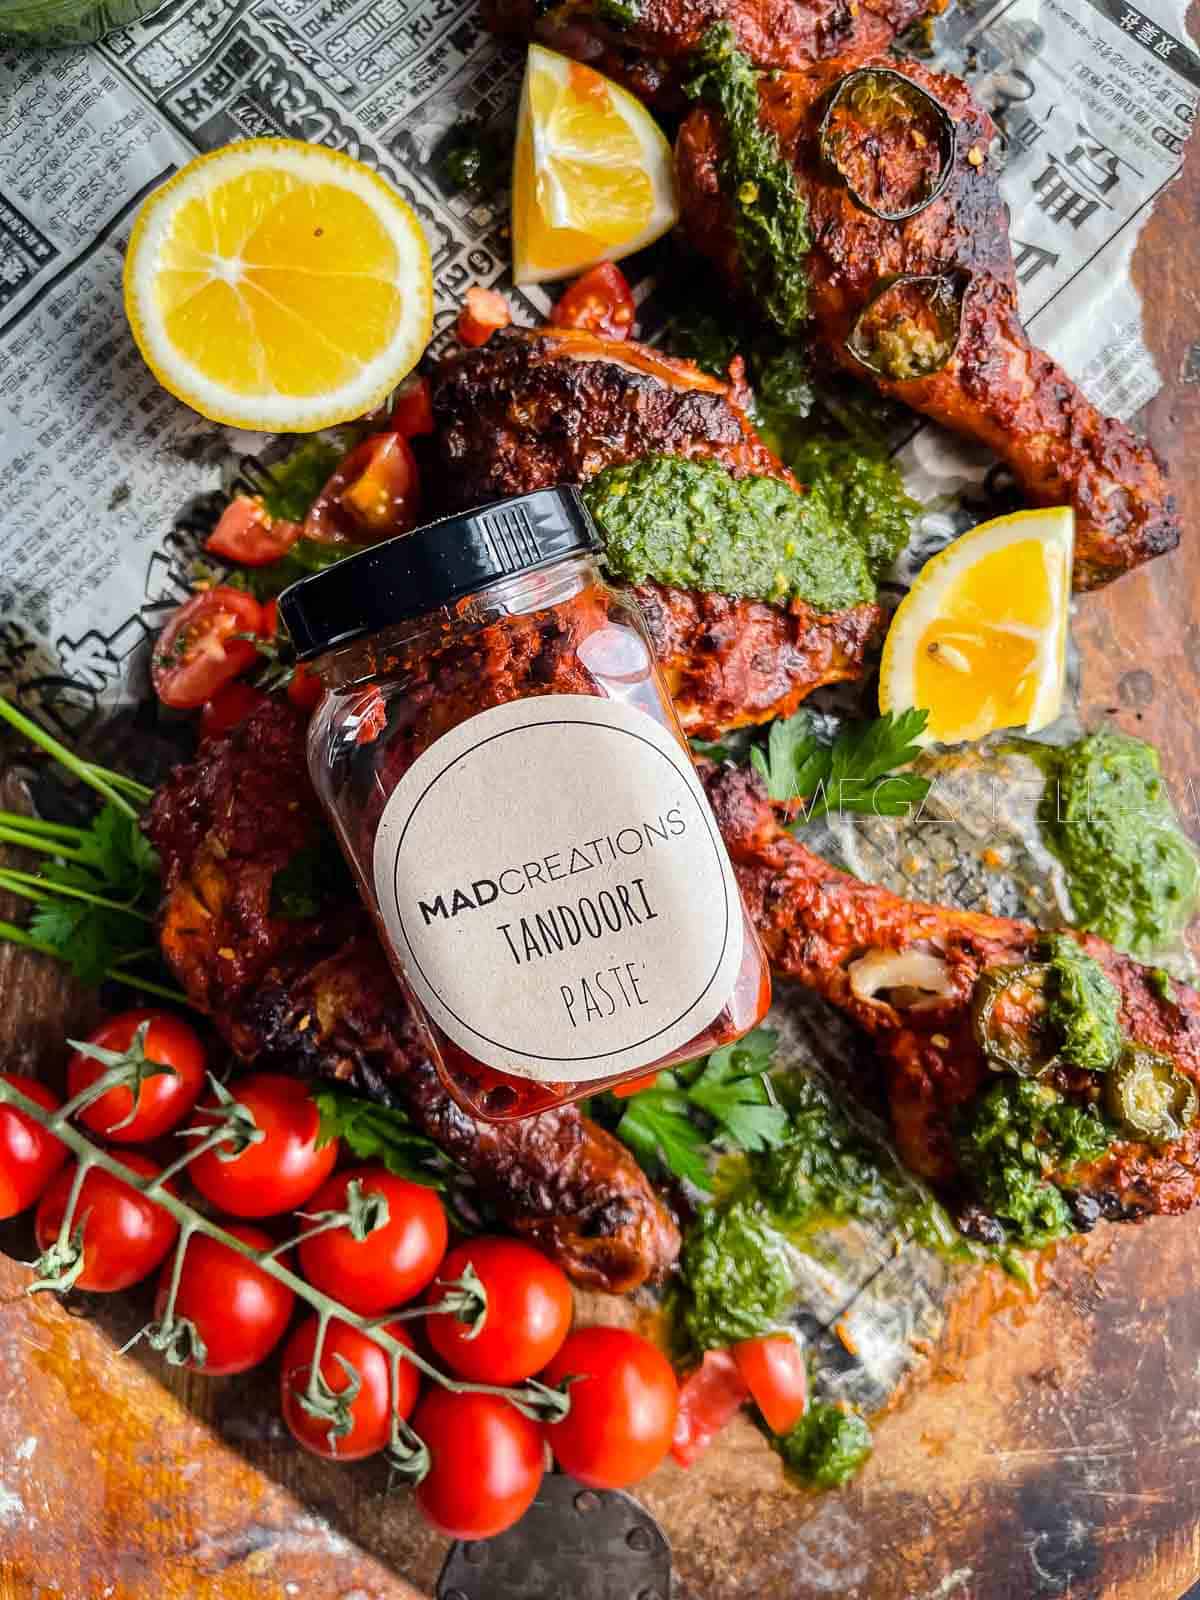 A jar of homemade tandoori pastes on top of baked pieces of chicken, tomatoes and herbs.